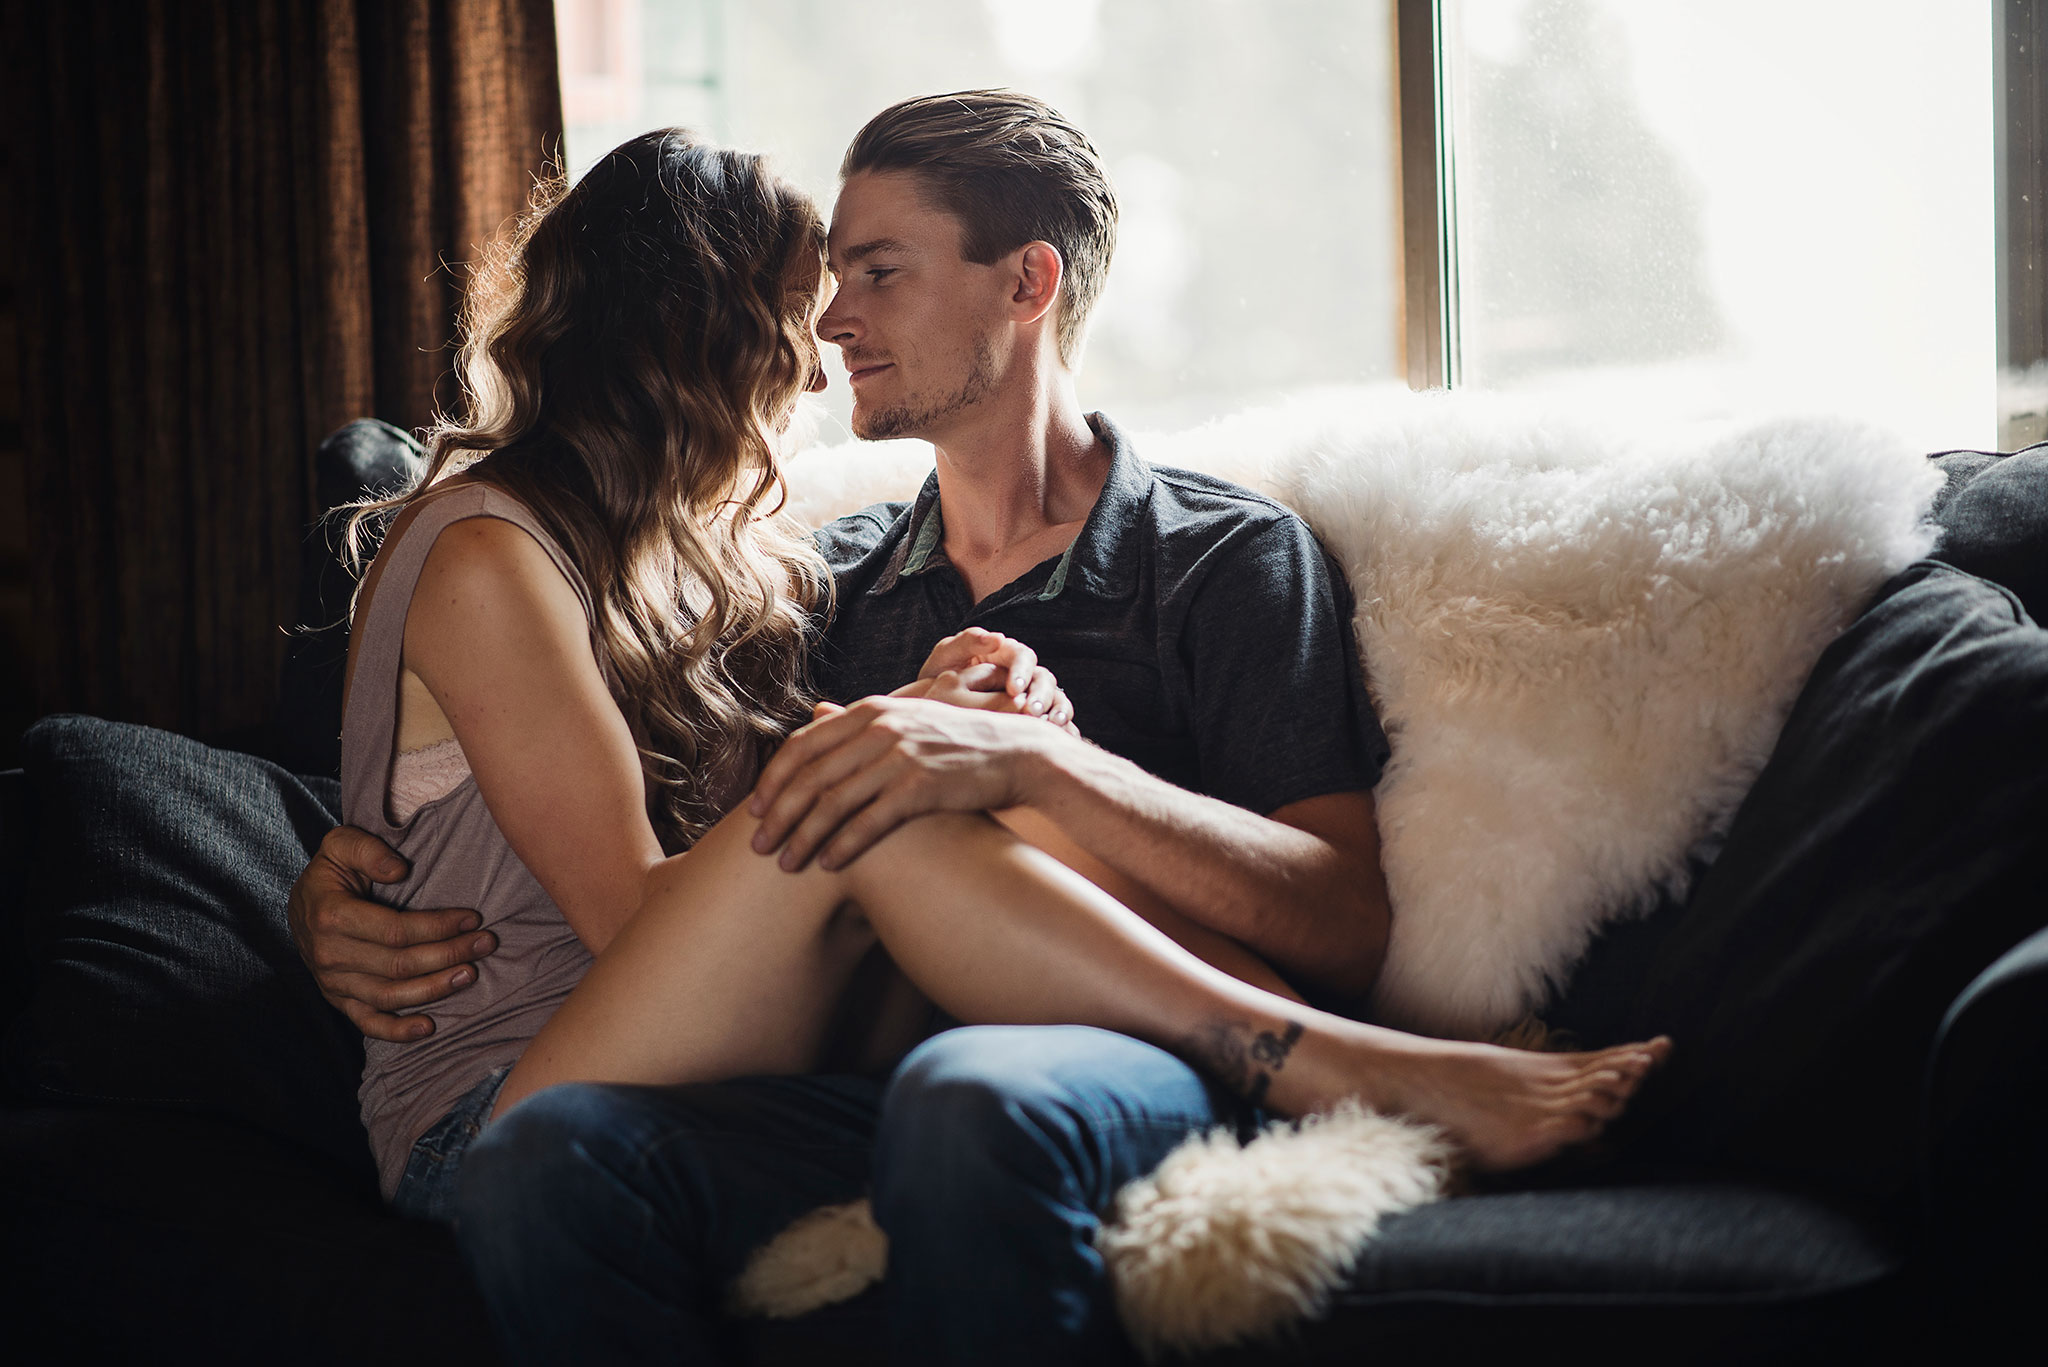 Couple snuggled together in a cozy cabin for engagement photographs.